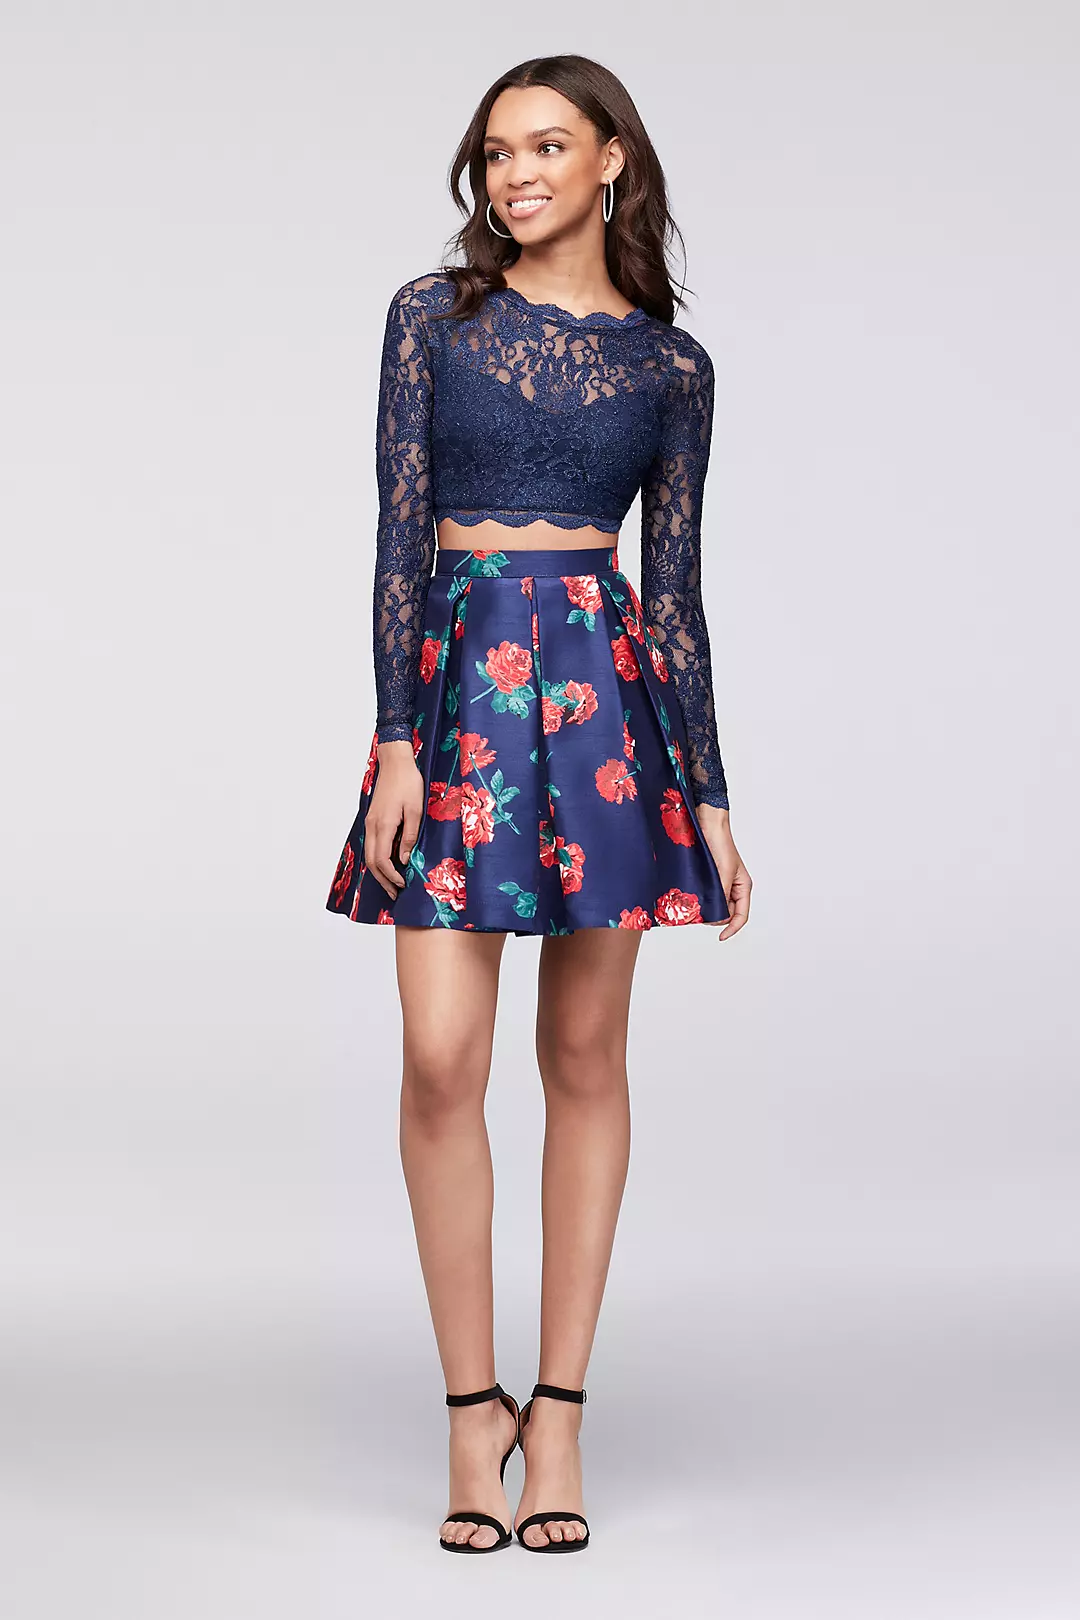 Shantung Skirt Set with Long-Sleeve Lace Crop Top Image